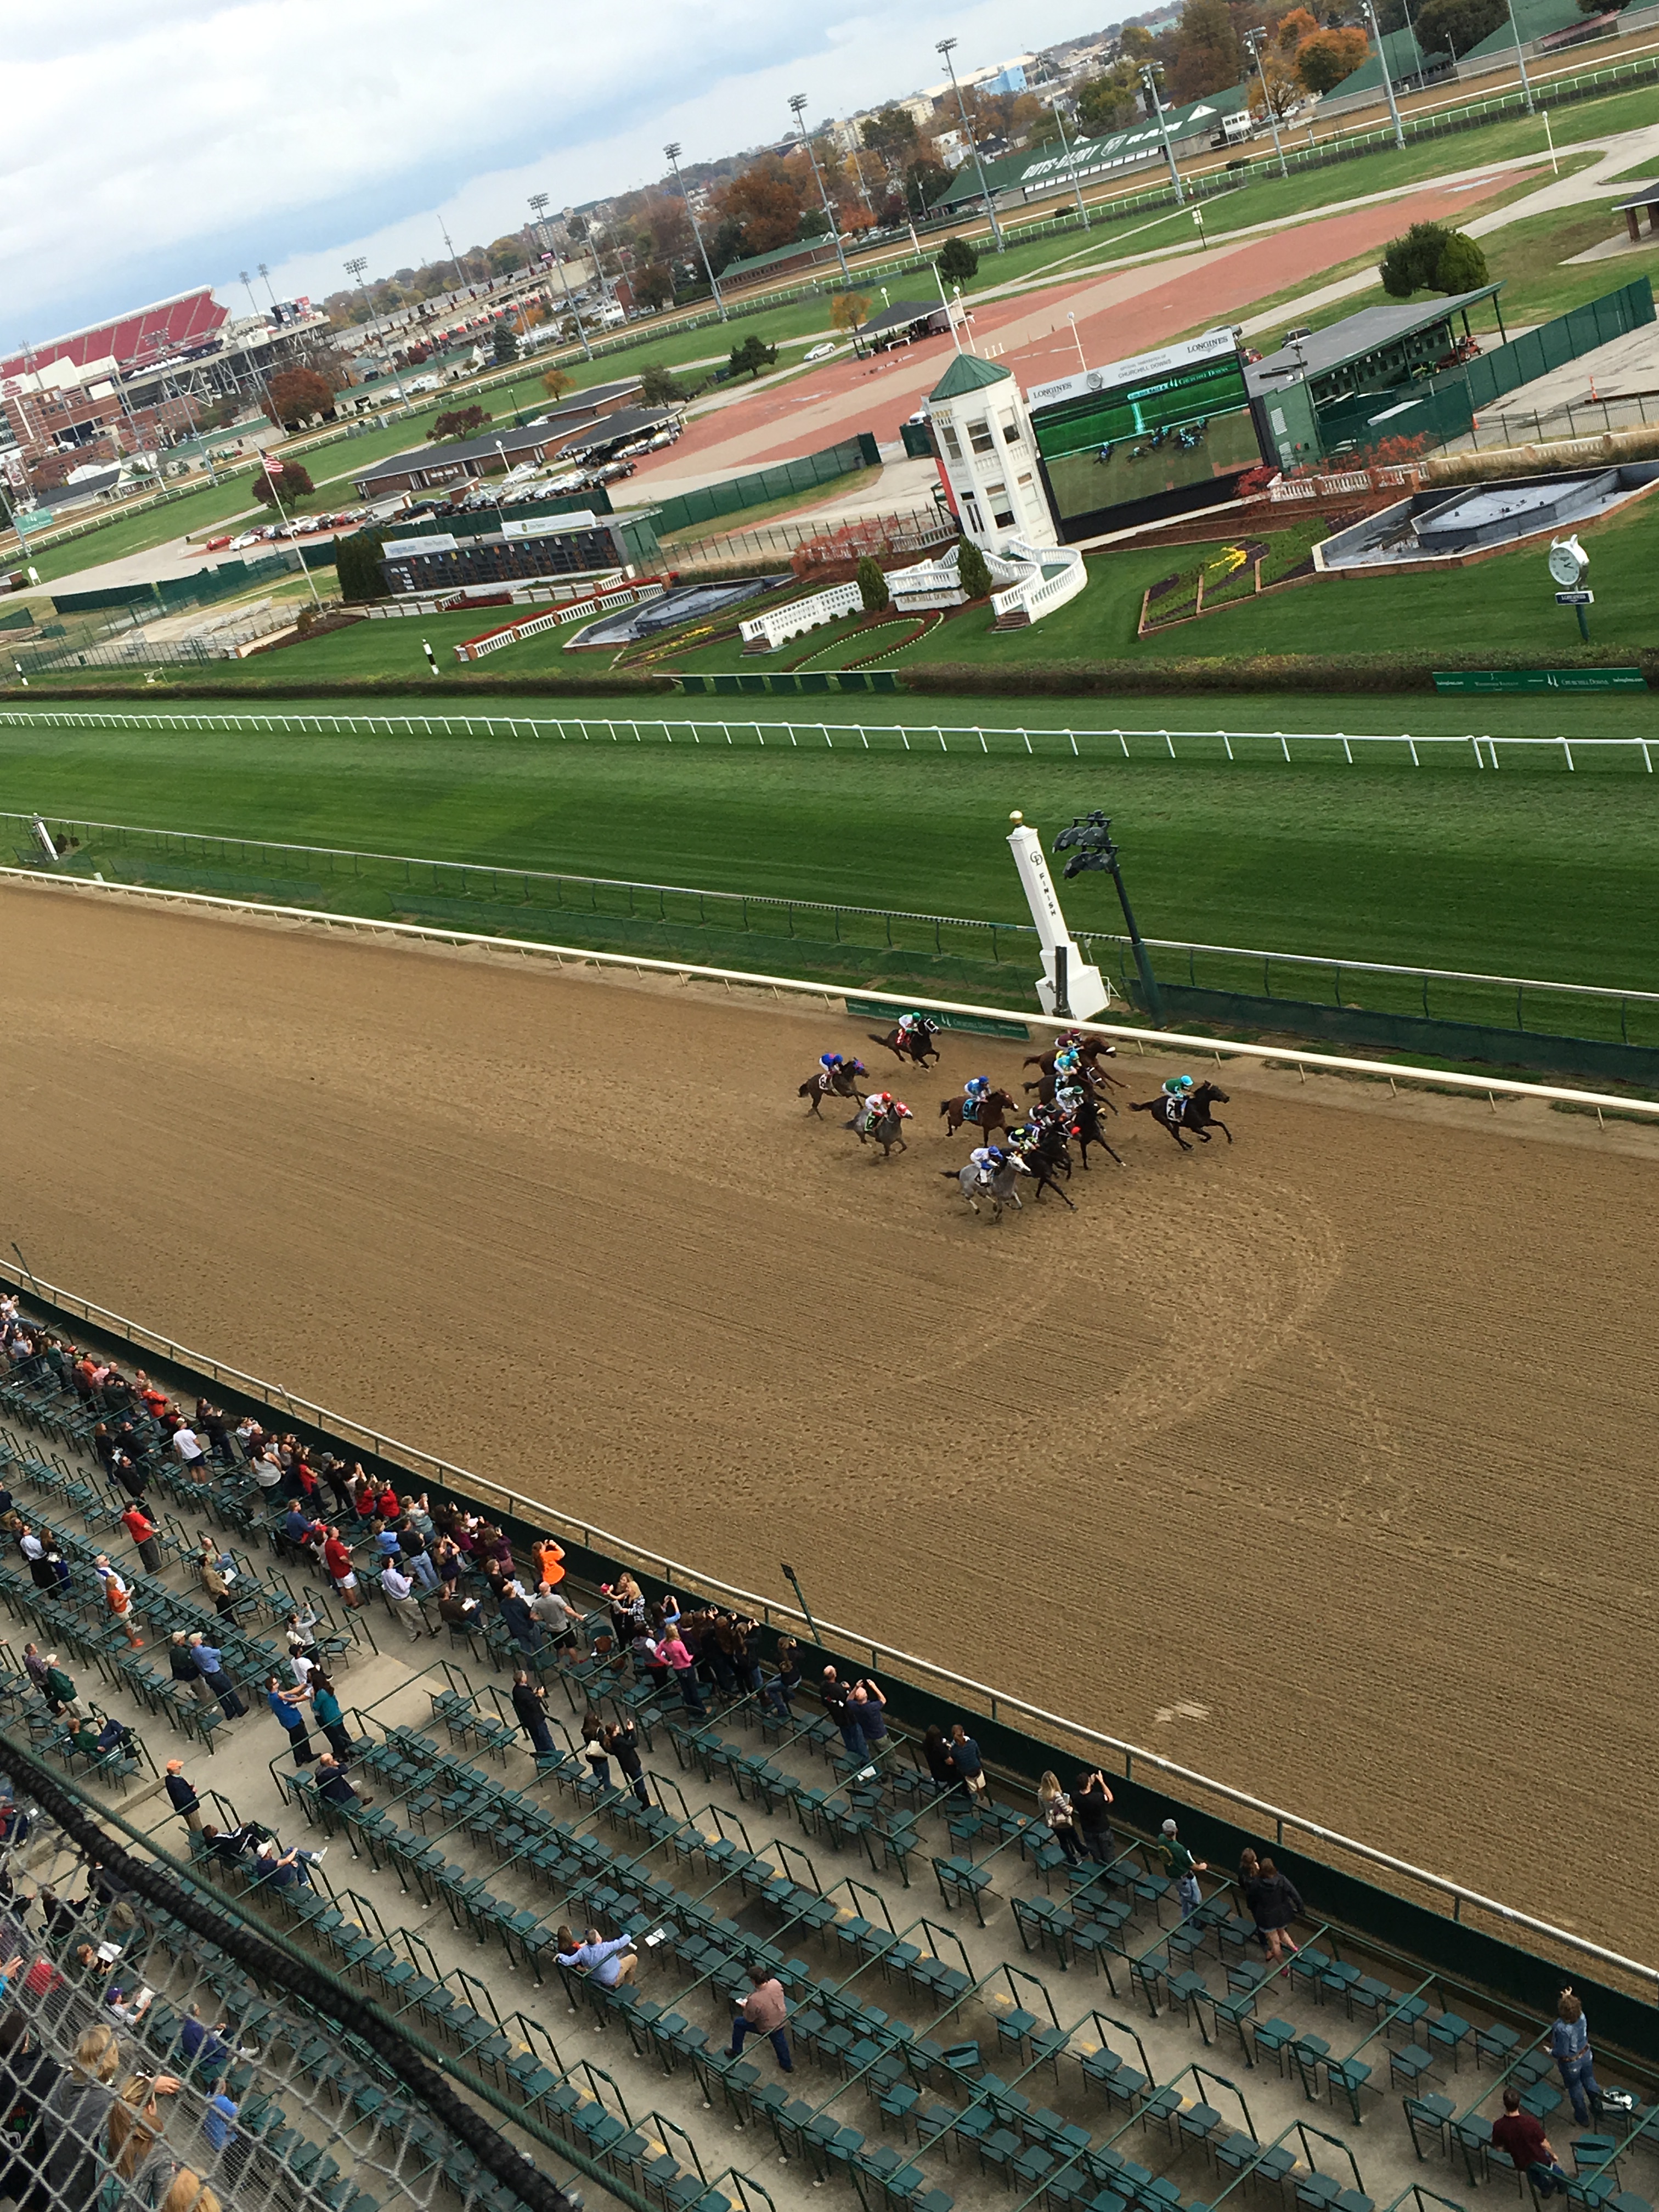 churchill downs tours hours